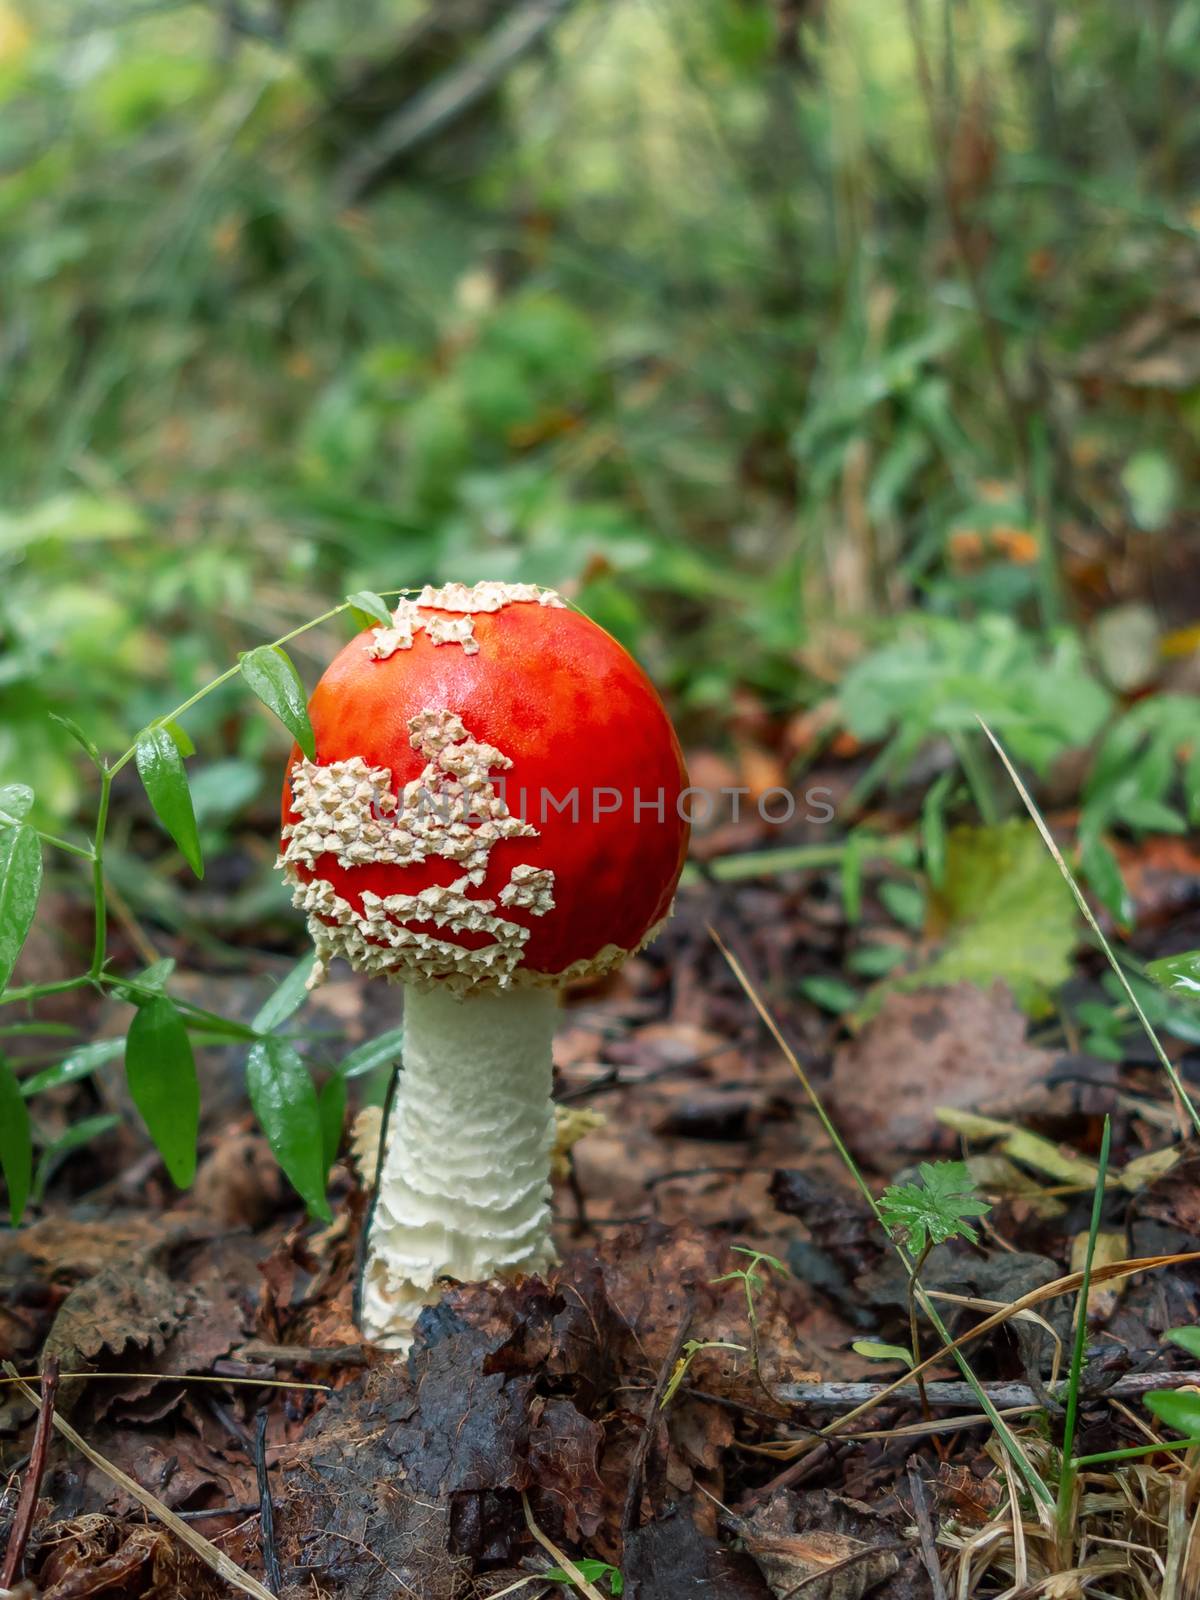 Small mushroom amanita known as fly agaric grows in the forest - vertical image.